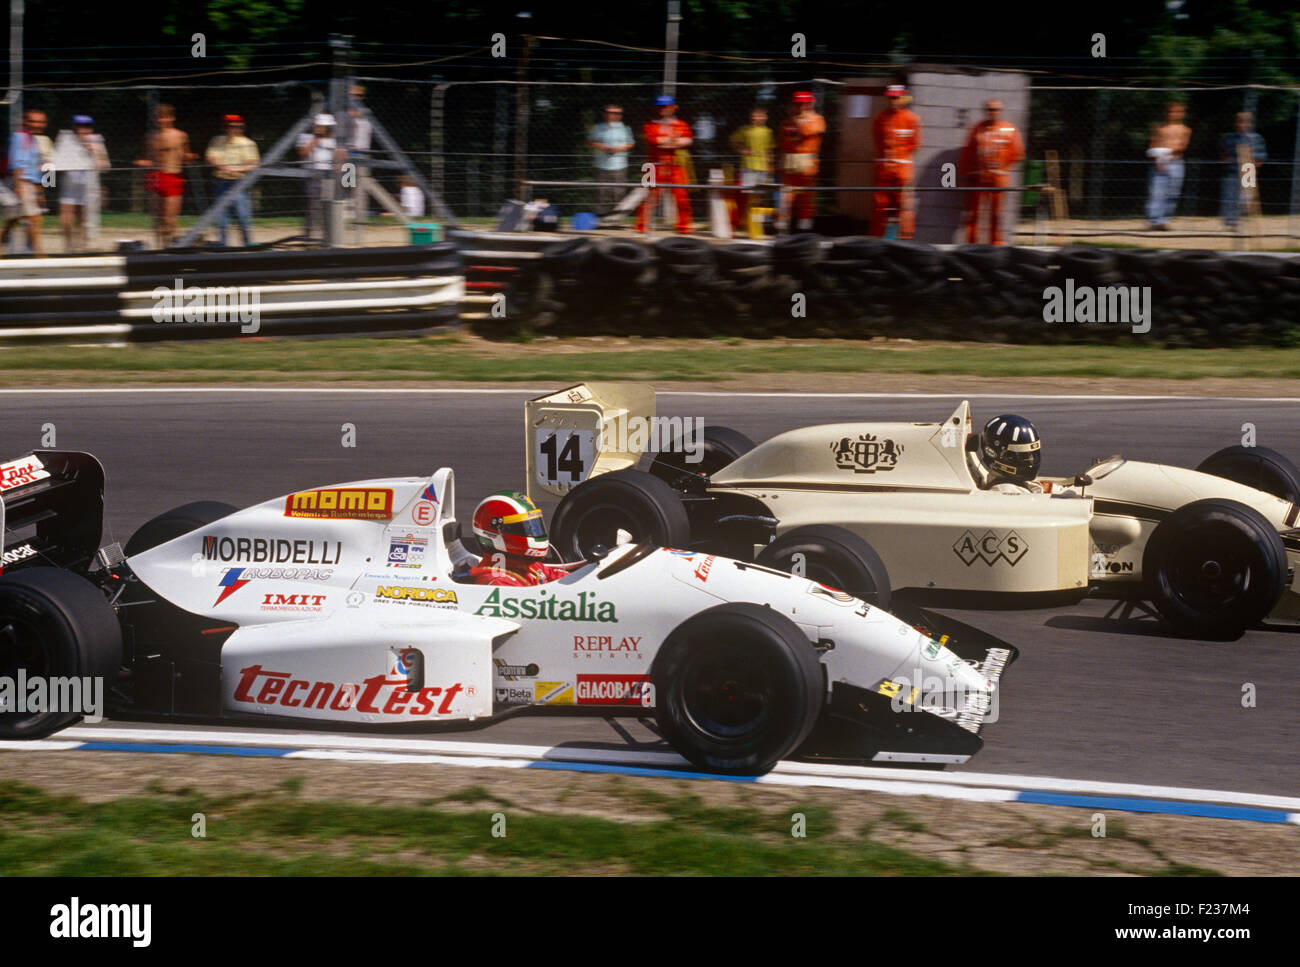 Emanuele Naspetti racing against Damon Hill in Formula 3000 in the 1990s. Stock Photo